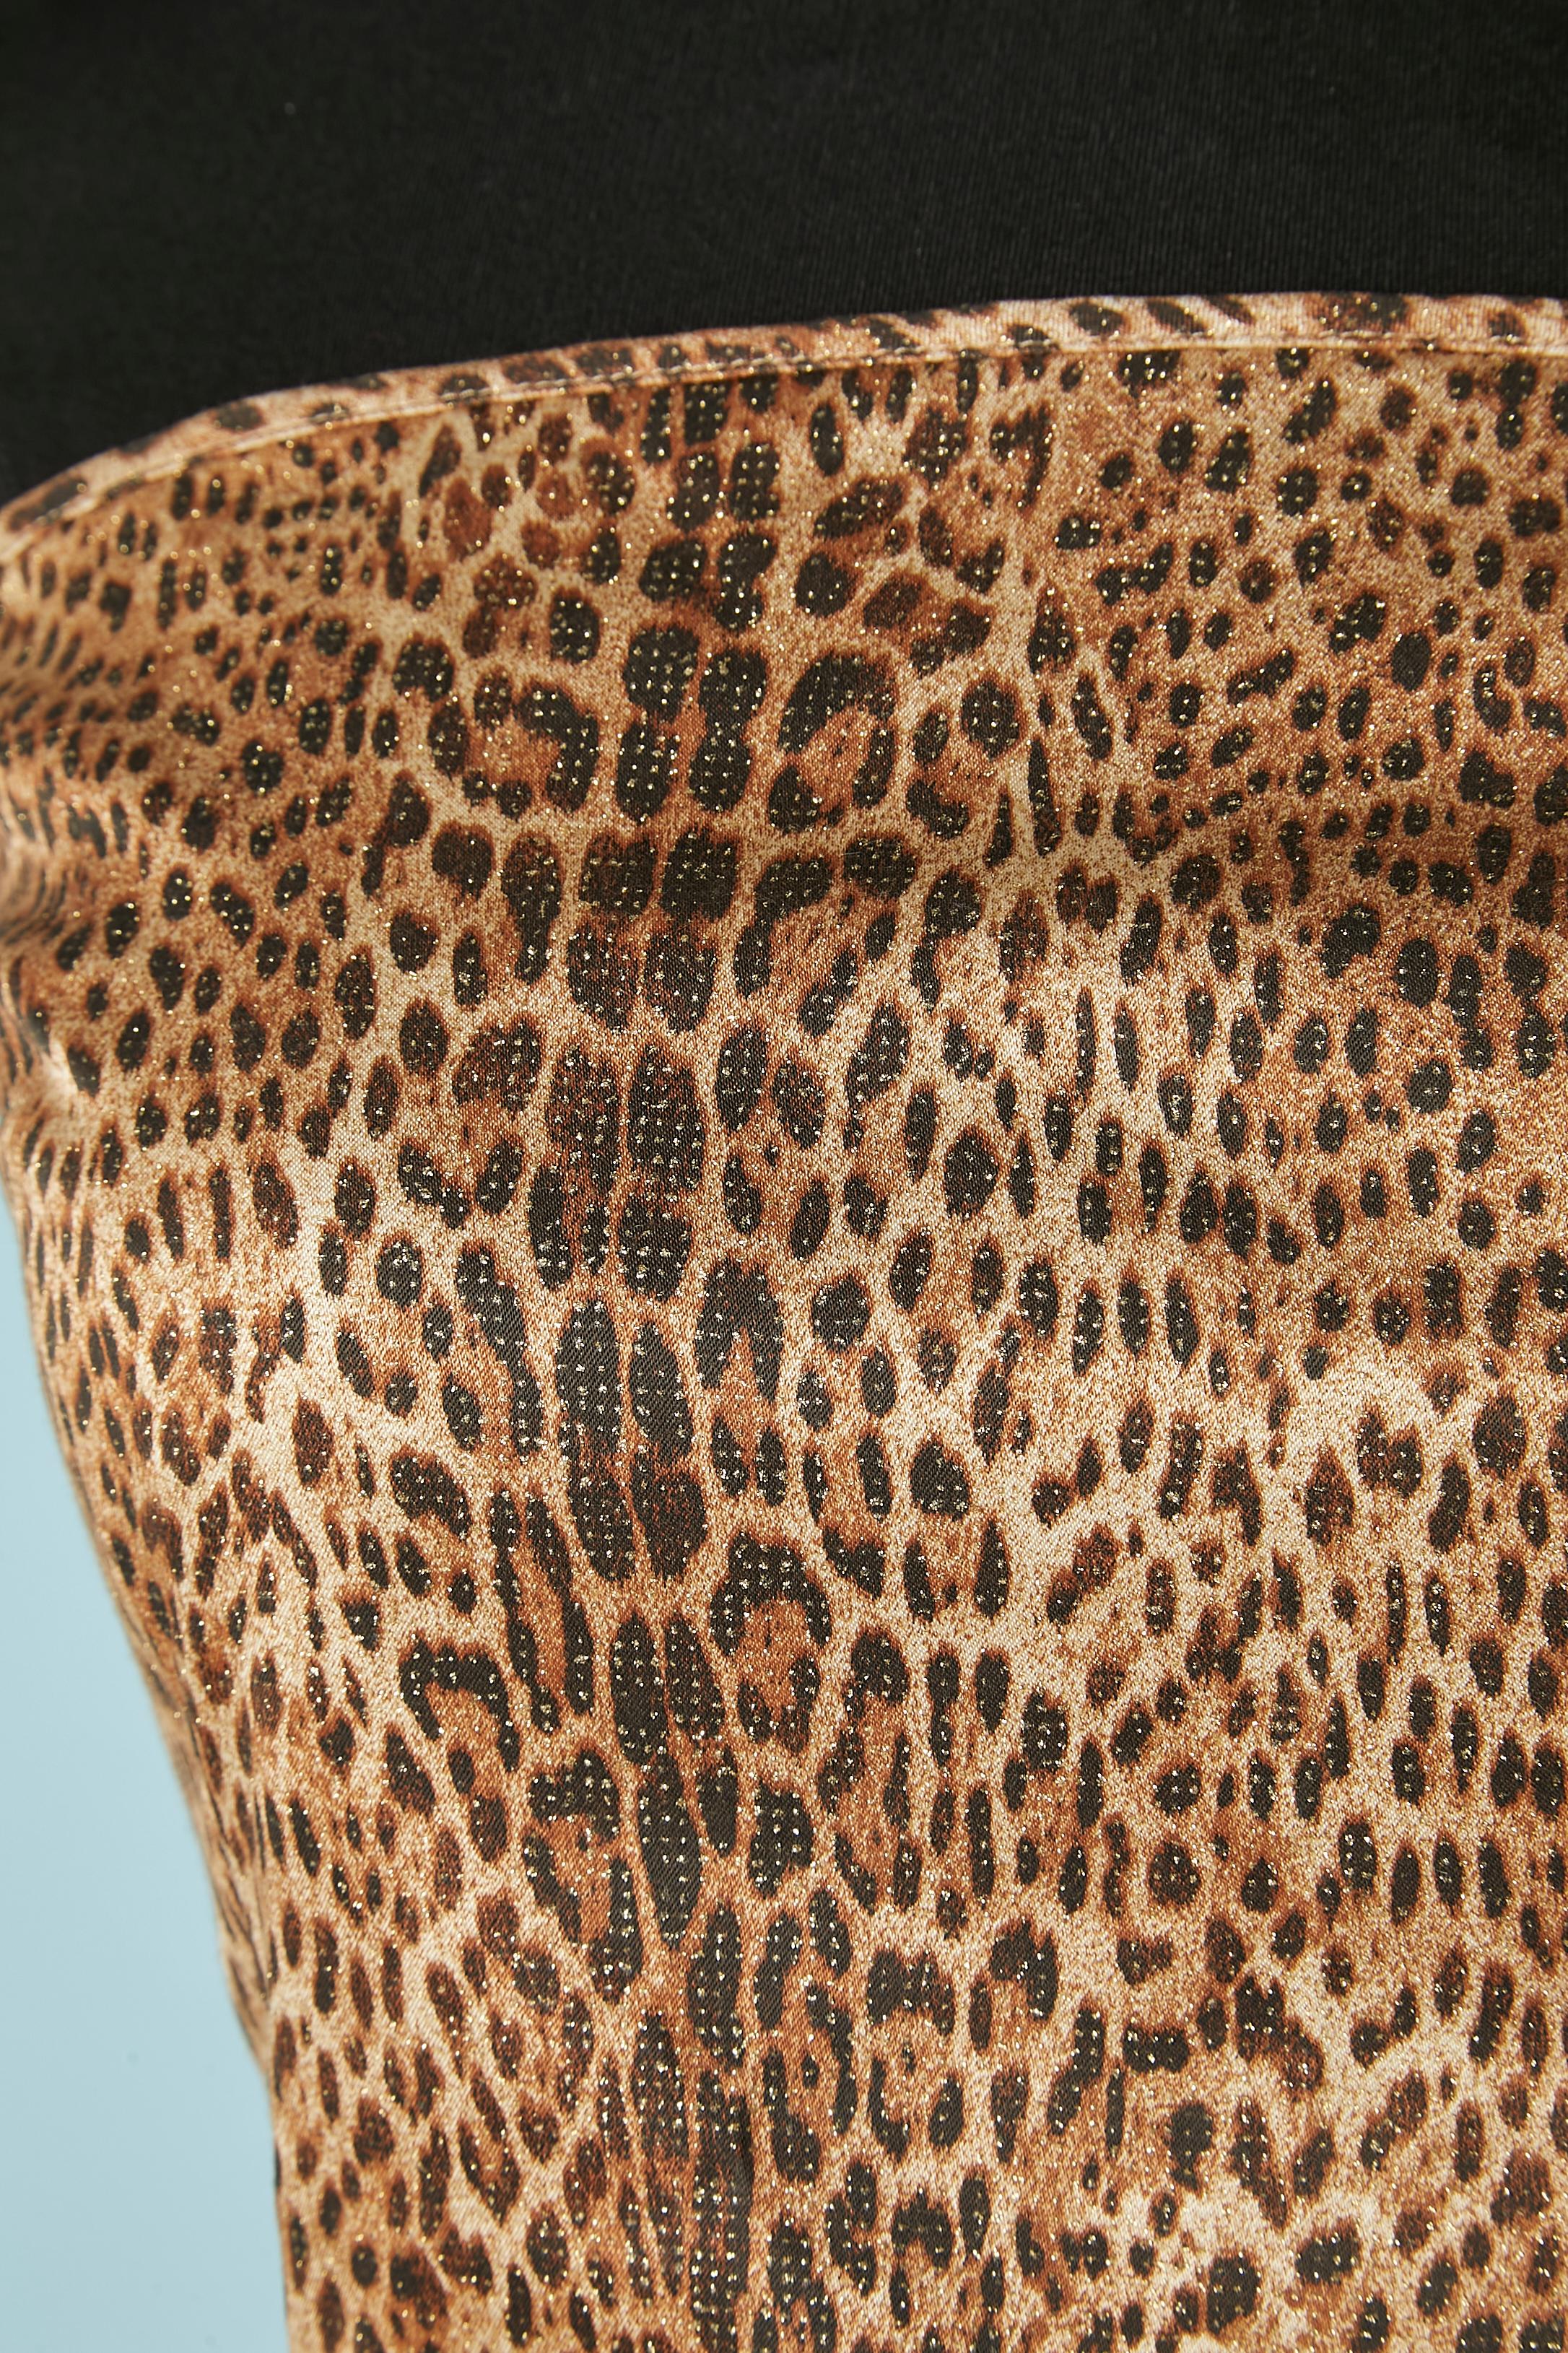 Bustier cocktail dress with leopard print and lurex thread. Fabric composition: 54% rayon, 43% cotton, 3% other fiber. No lining. Authenticity hologram . Zip on the left side and branded zip-puller.
SIZE 44 (It) 40 (Fr) 10 (Us) 